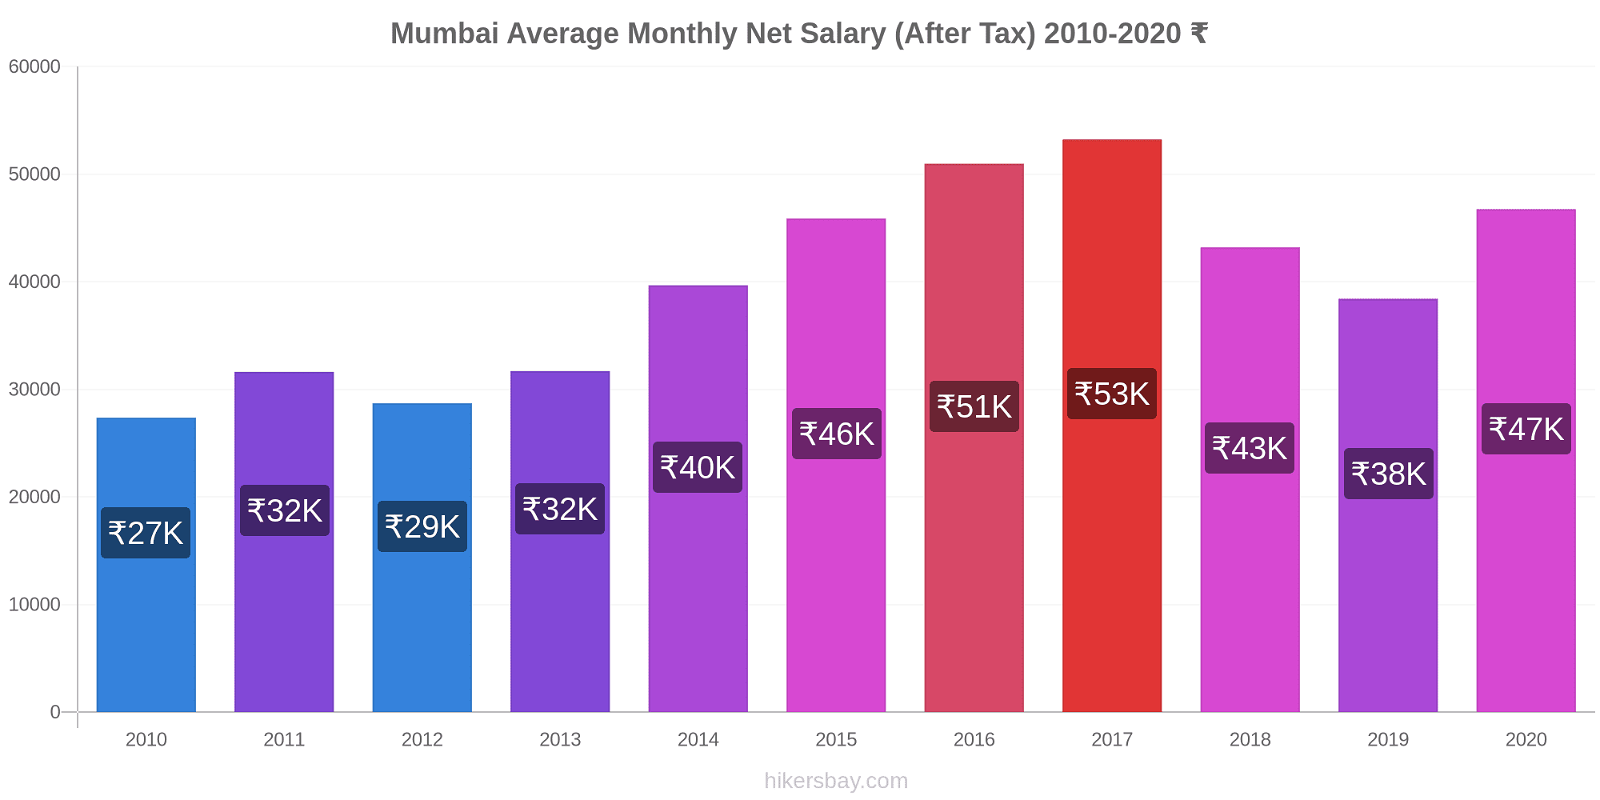 Mumbai price changes Average Monthly Net Salary (After Tax) hikersbay.com